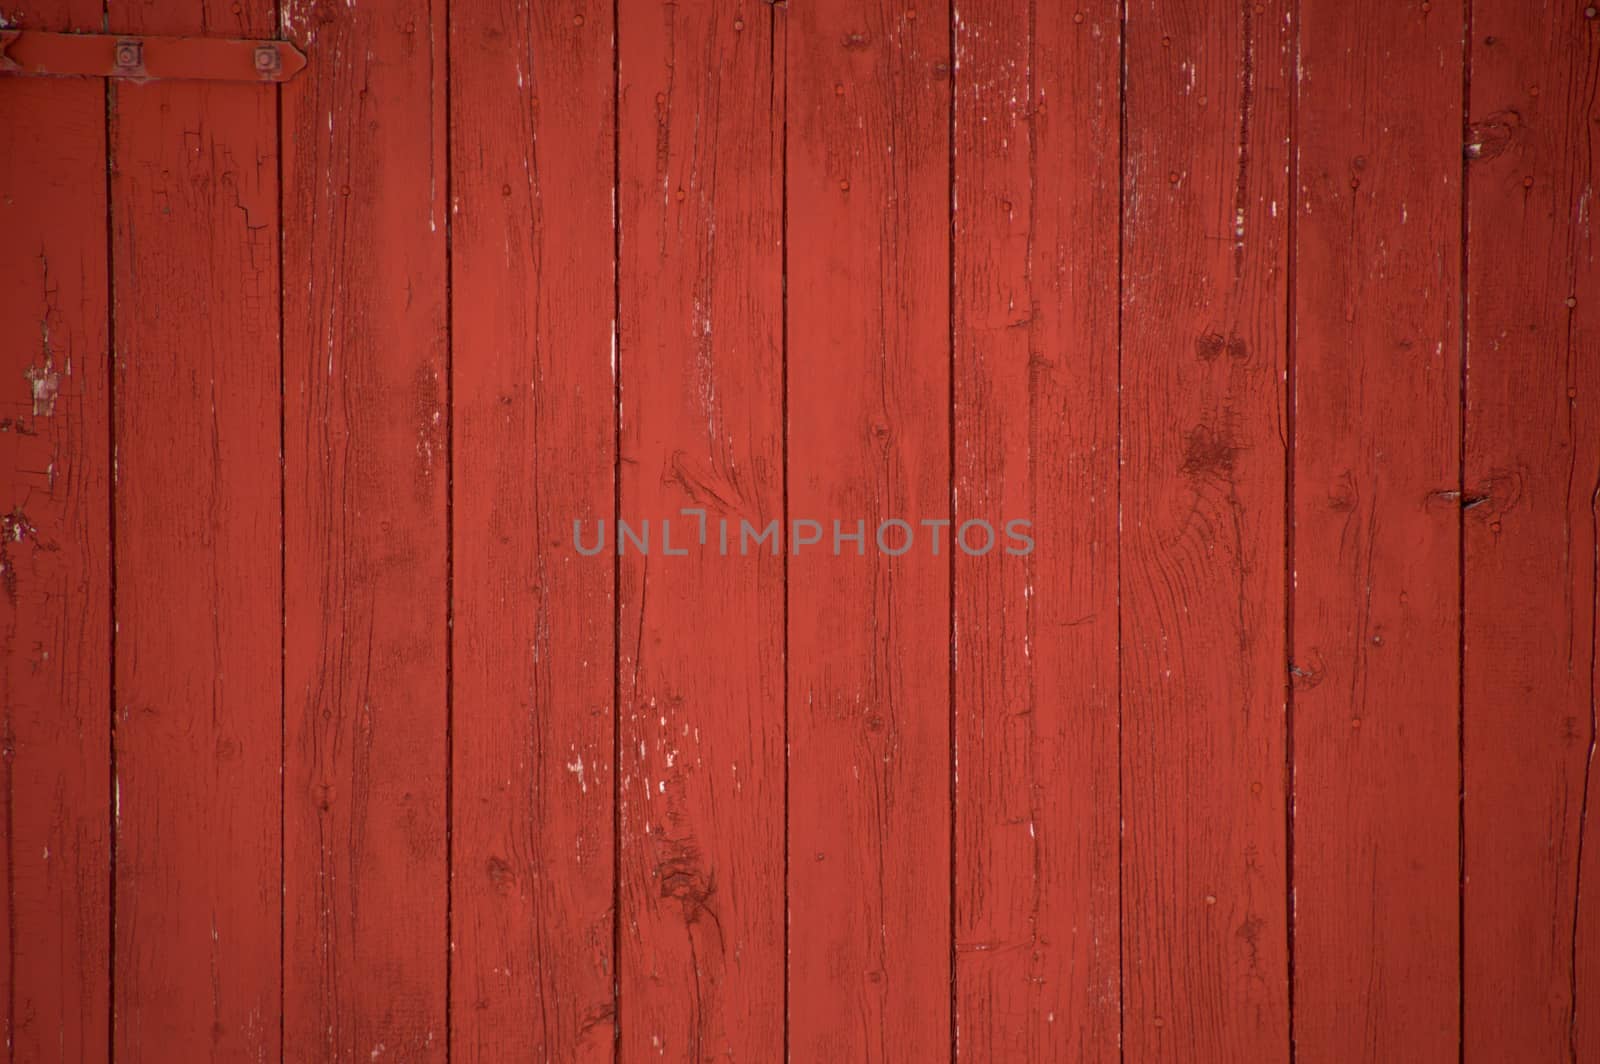 Vertical oxblood red barn door boards and planks background. One red hinge.